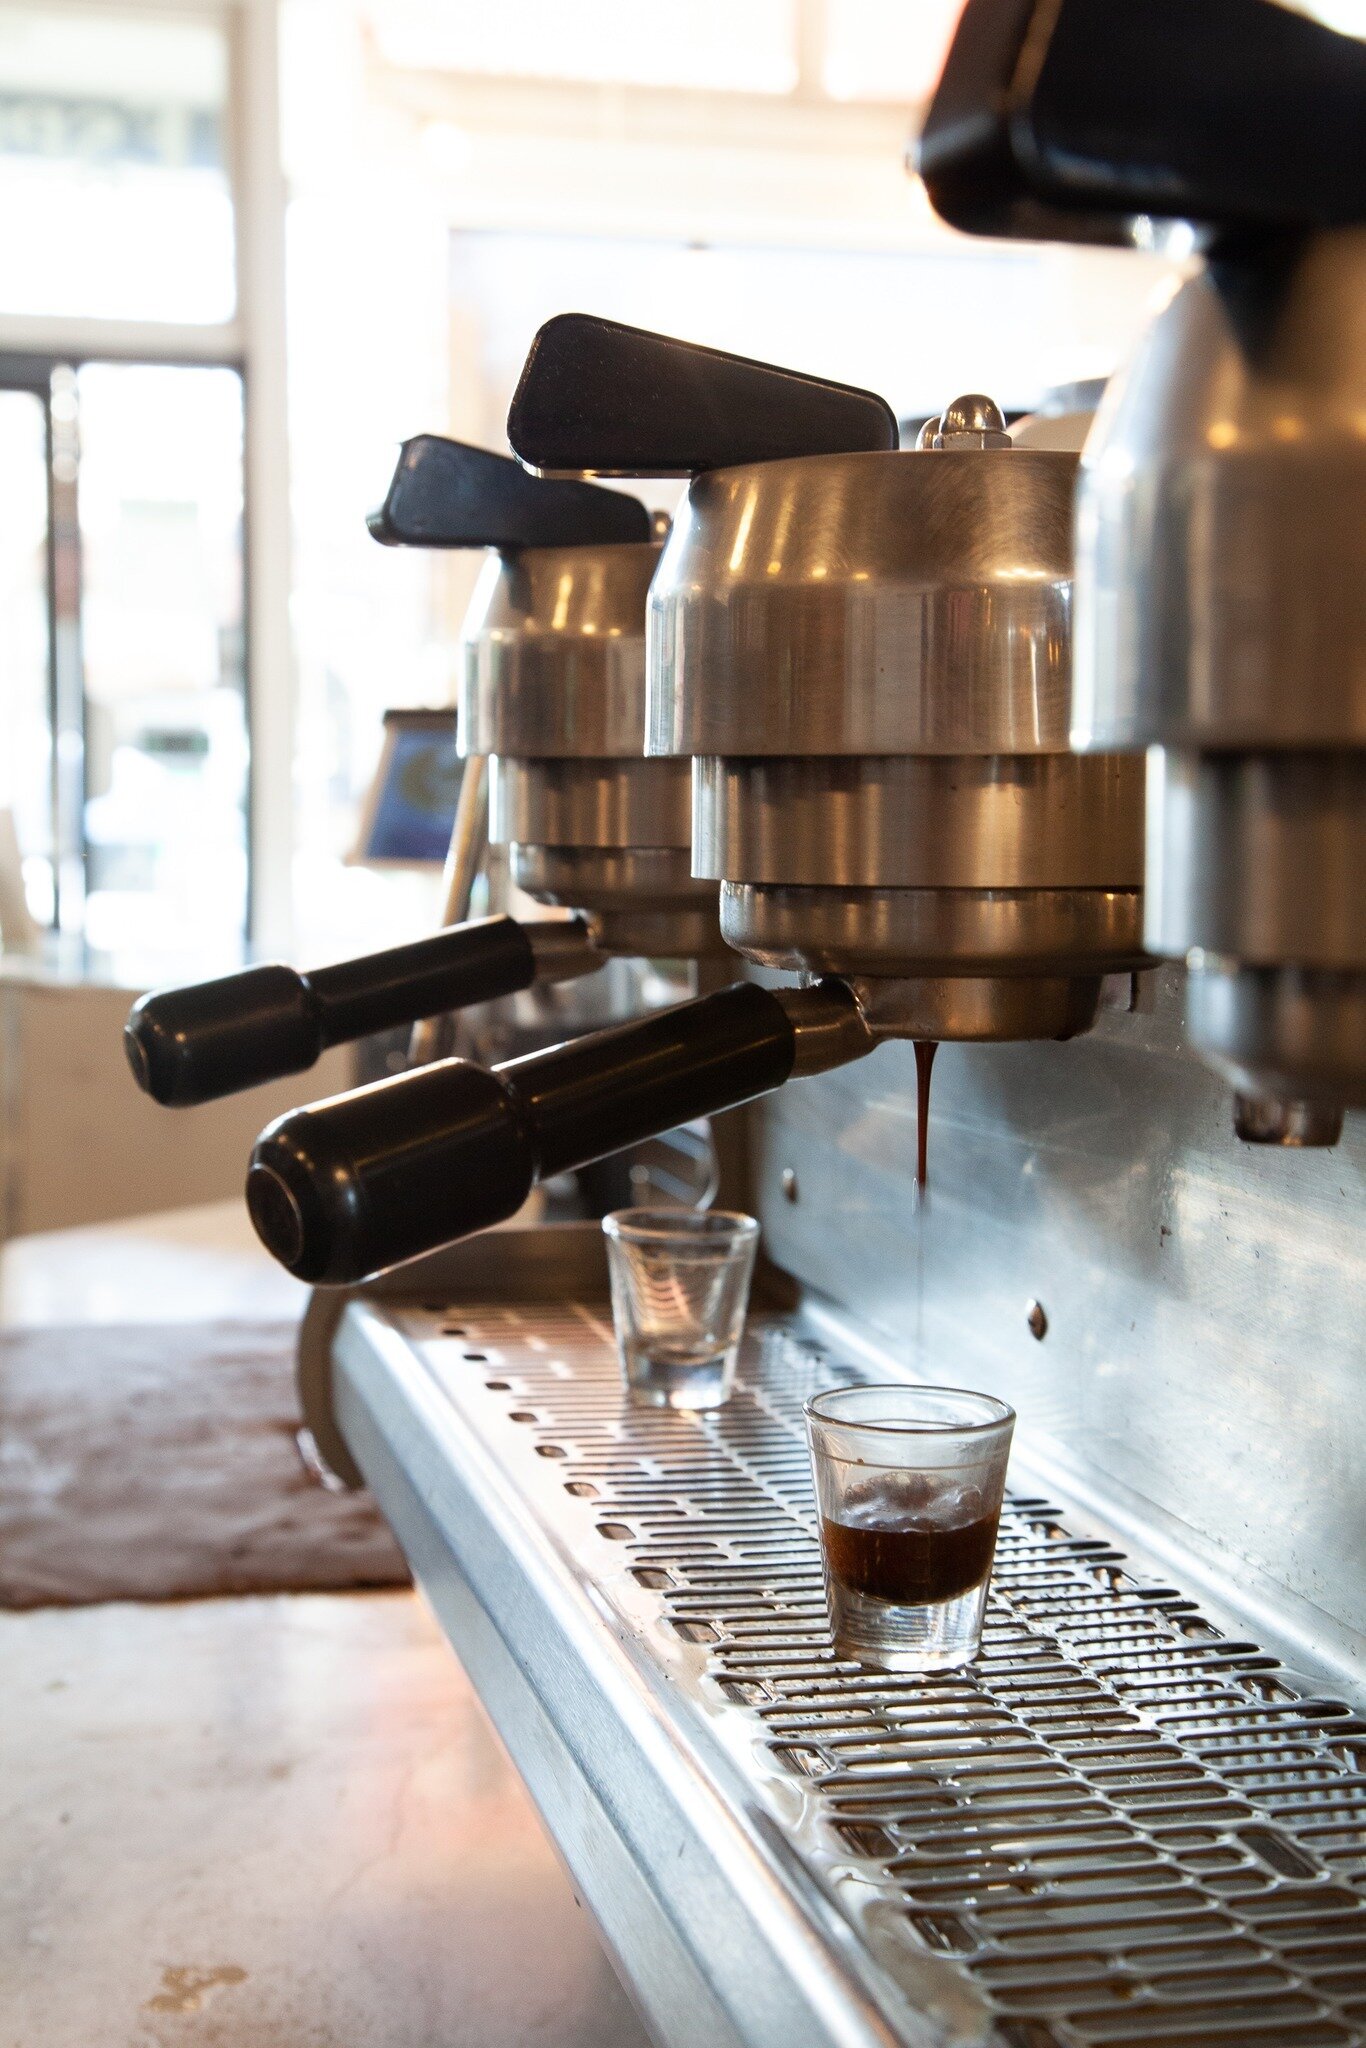 Hey Livermore coffee addicts! ☕️ Are you ready to have your taste buds blown away? Because at Rosetta Roasting, we're serving up some serious flavor with our signature ristretto shots! 

We believe that every cup of coffee should be an experience, an